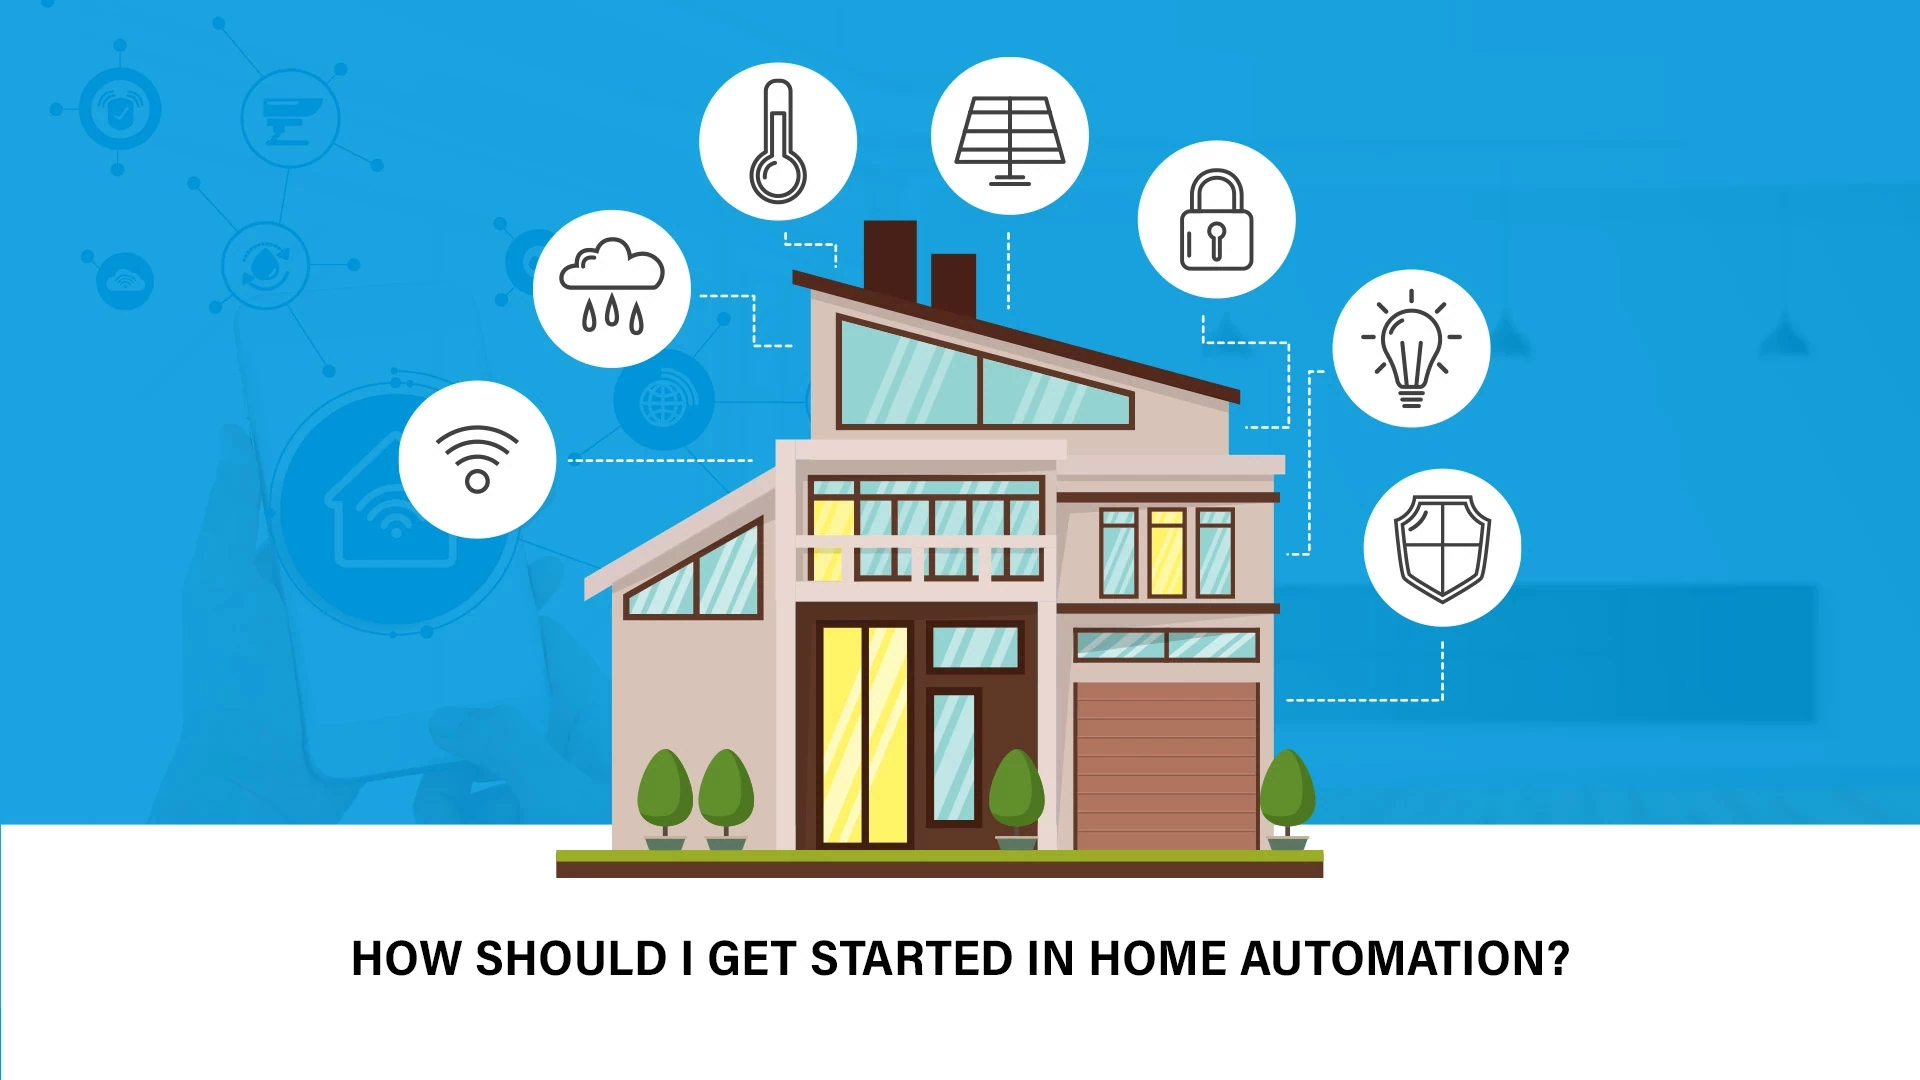 How Should I Get Started in Home Automation?